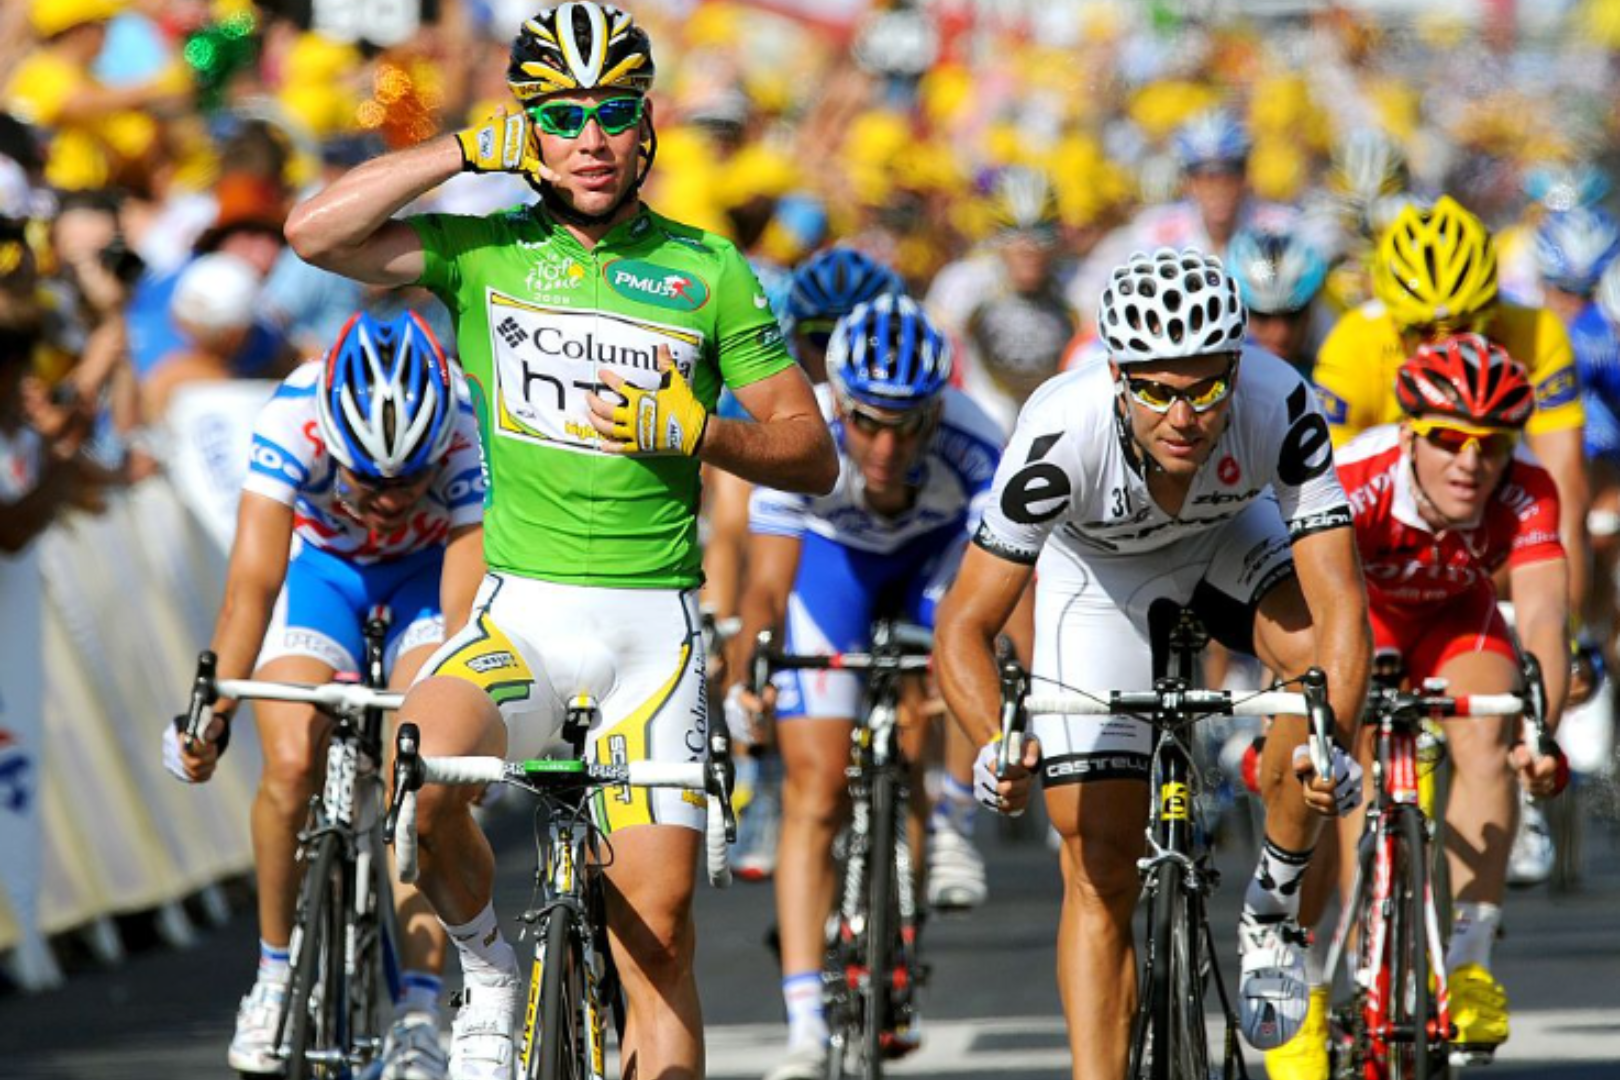 article_img / How Many Times Did Mark Cavendish Win Tour de France?